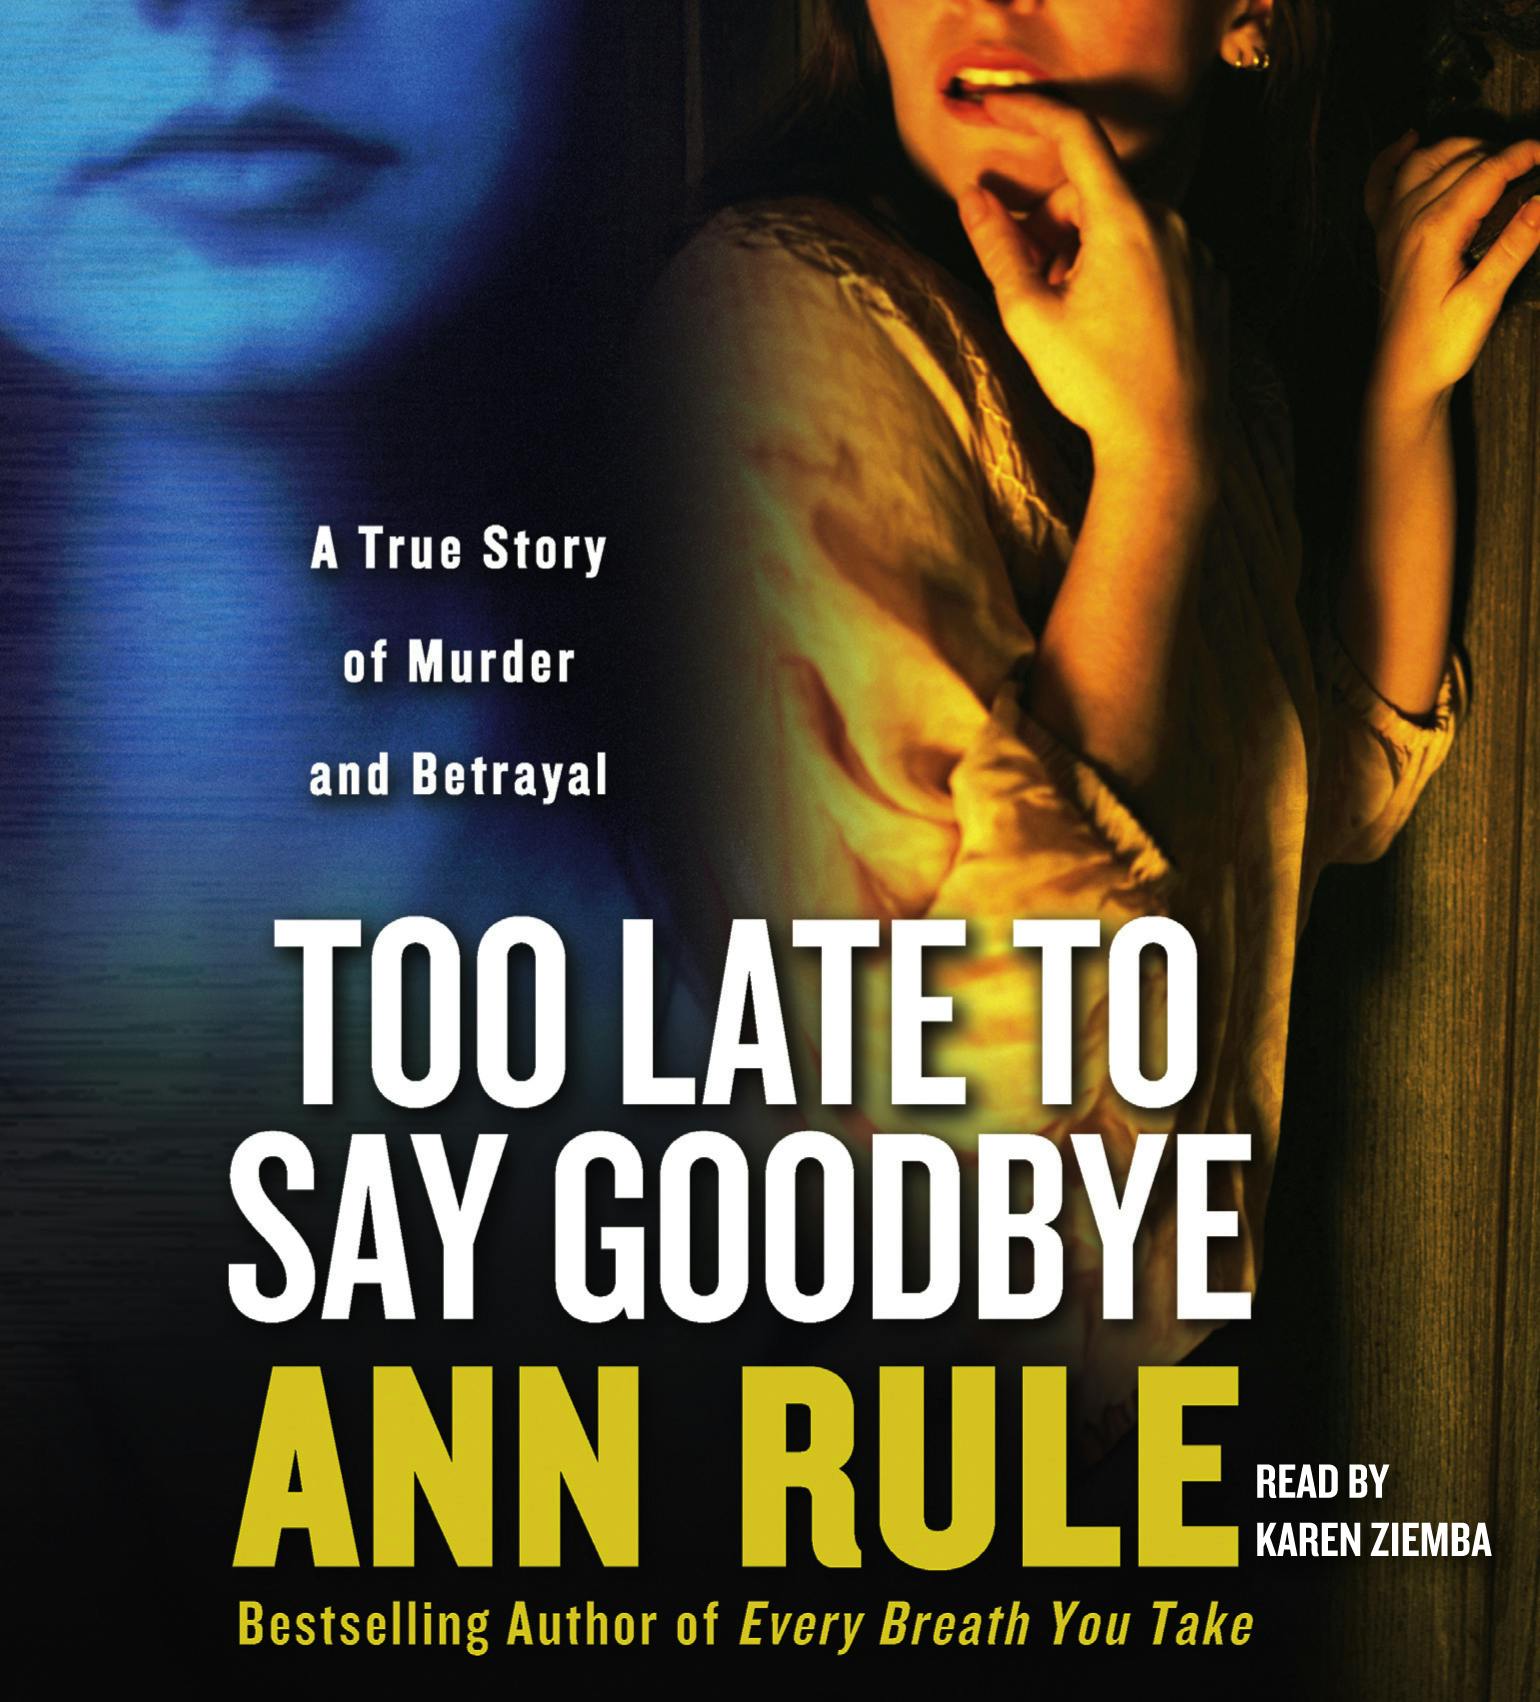 Too Late to Say Goodbye: A True Story of Murder and Betrayal - Ann Rule